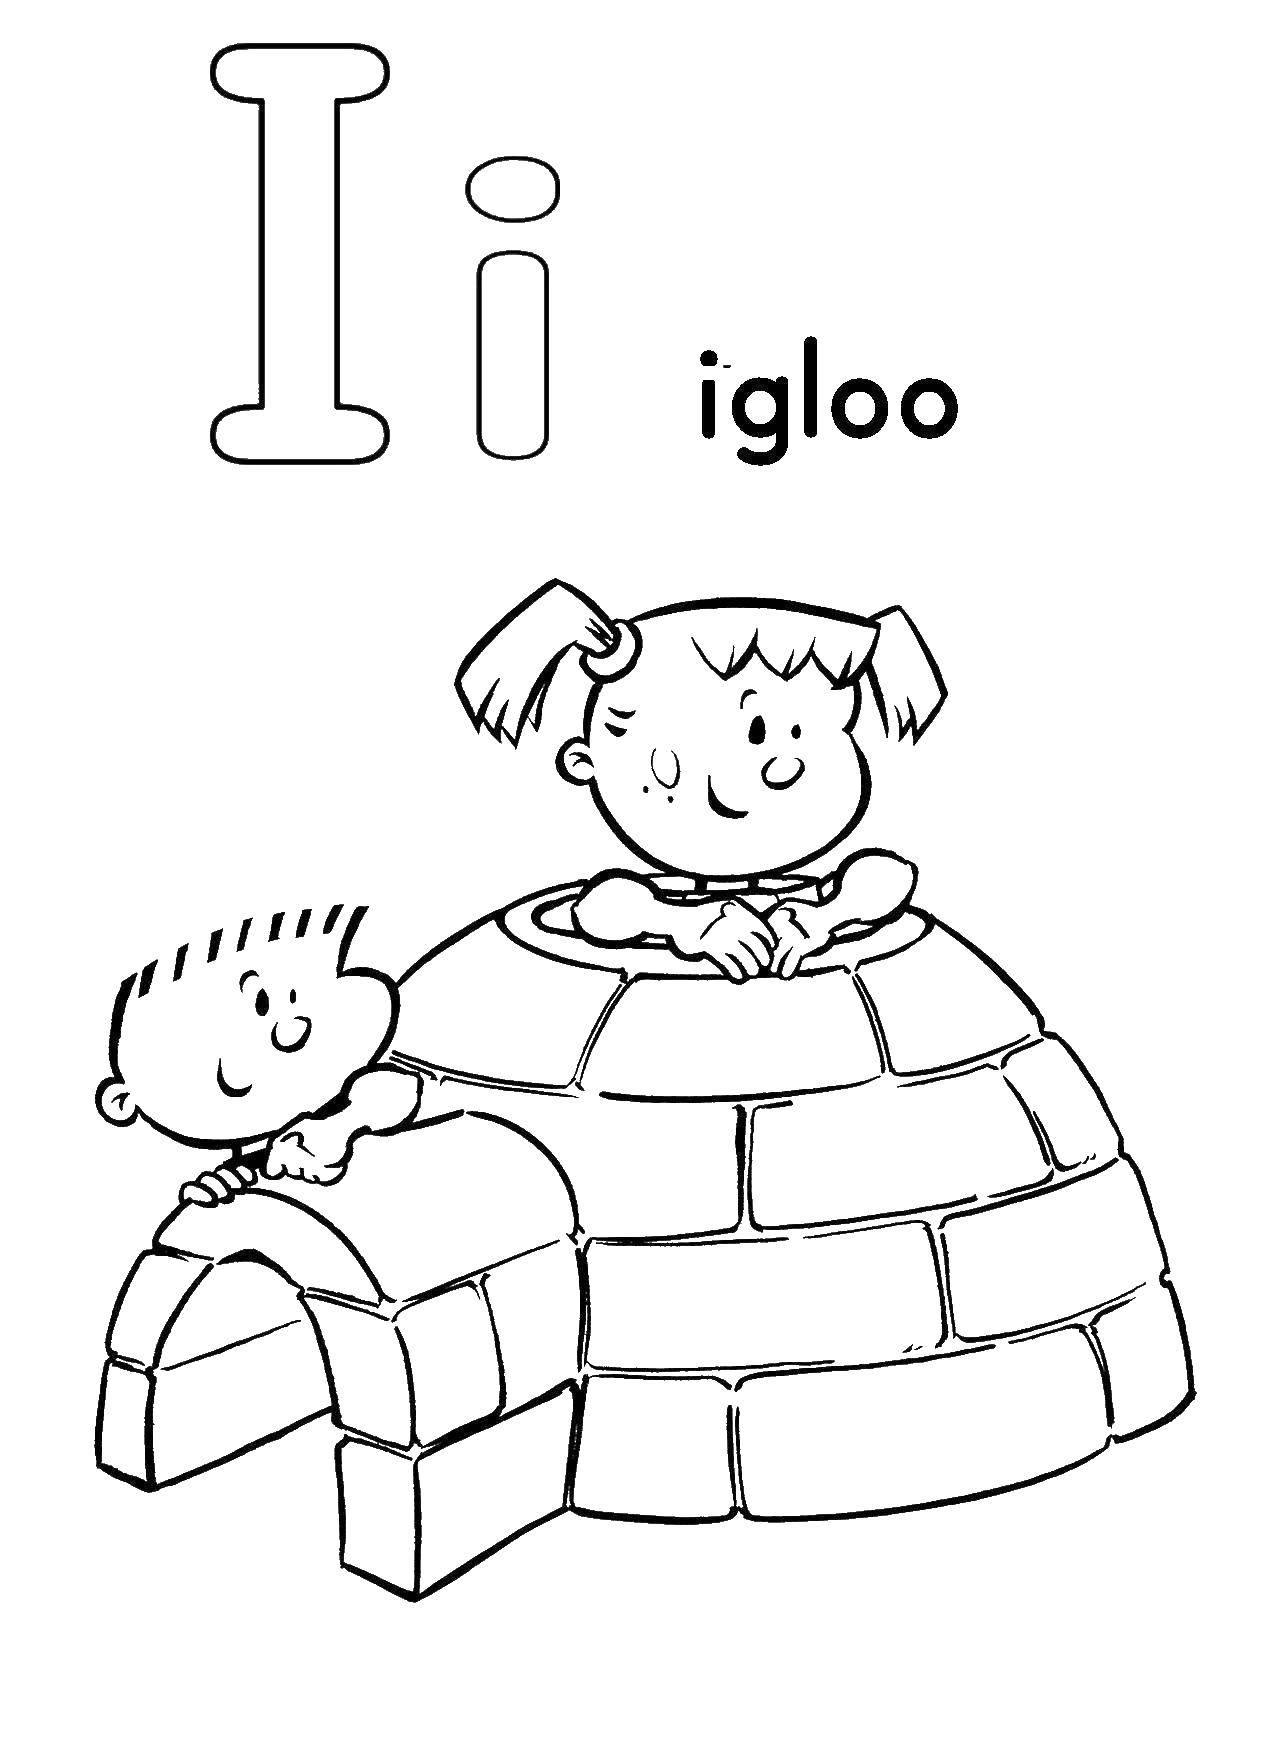 Coloring Children in the candy, went straight to the house. Category English alphabet. Tags:  children, ice.